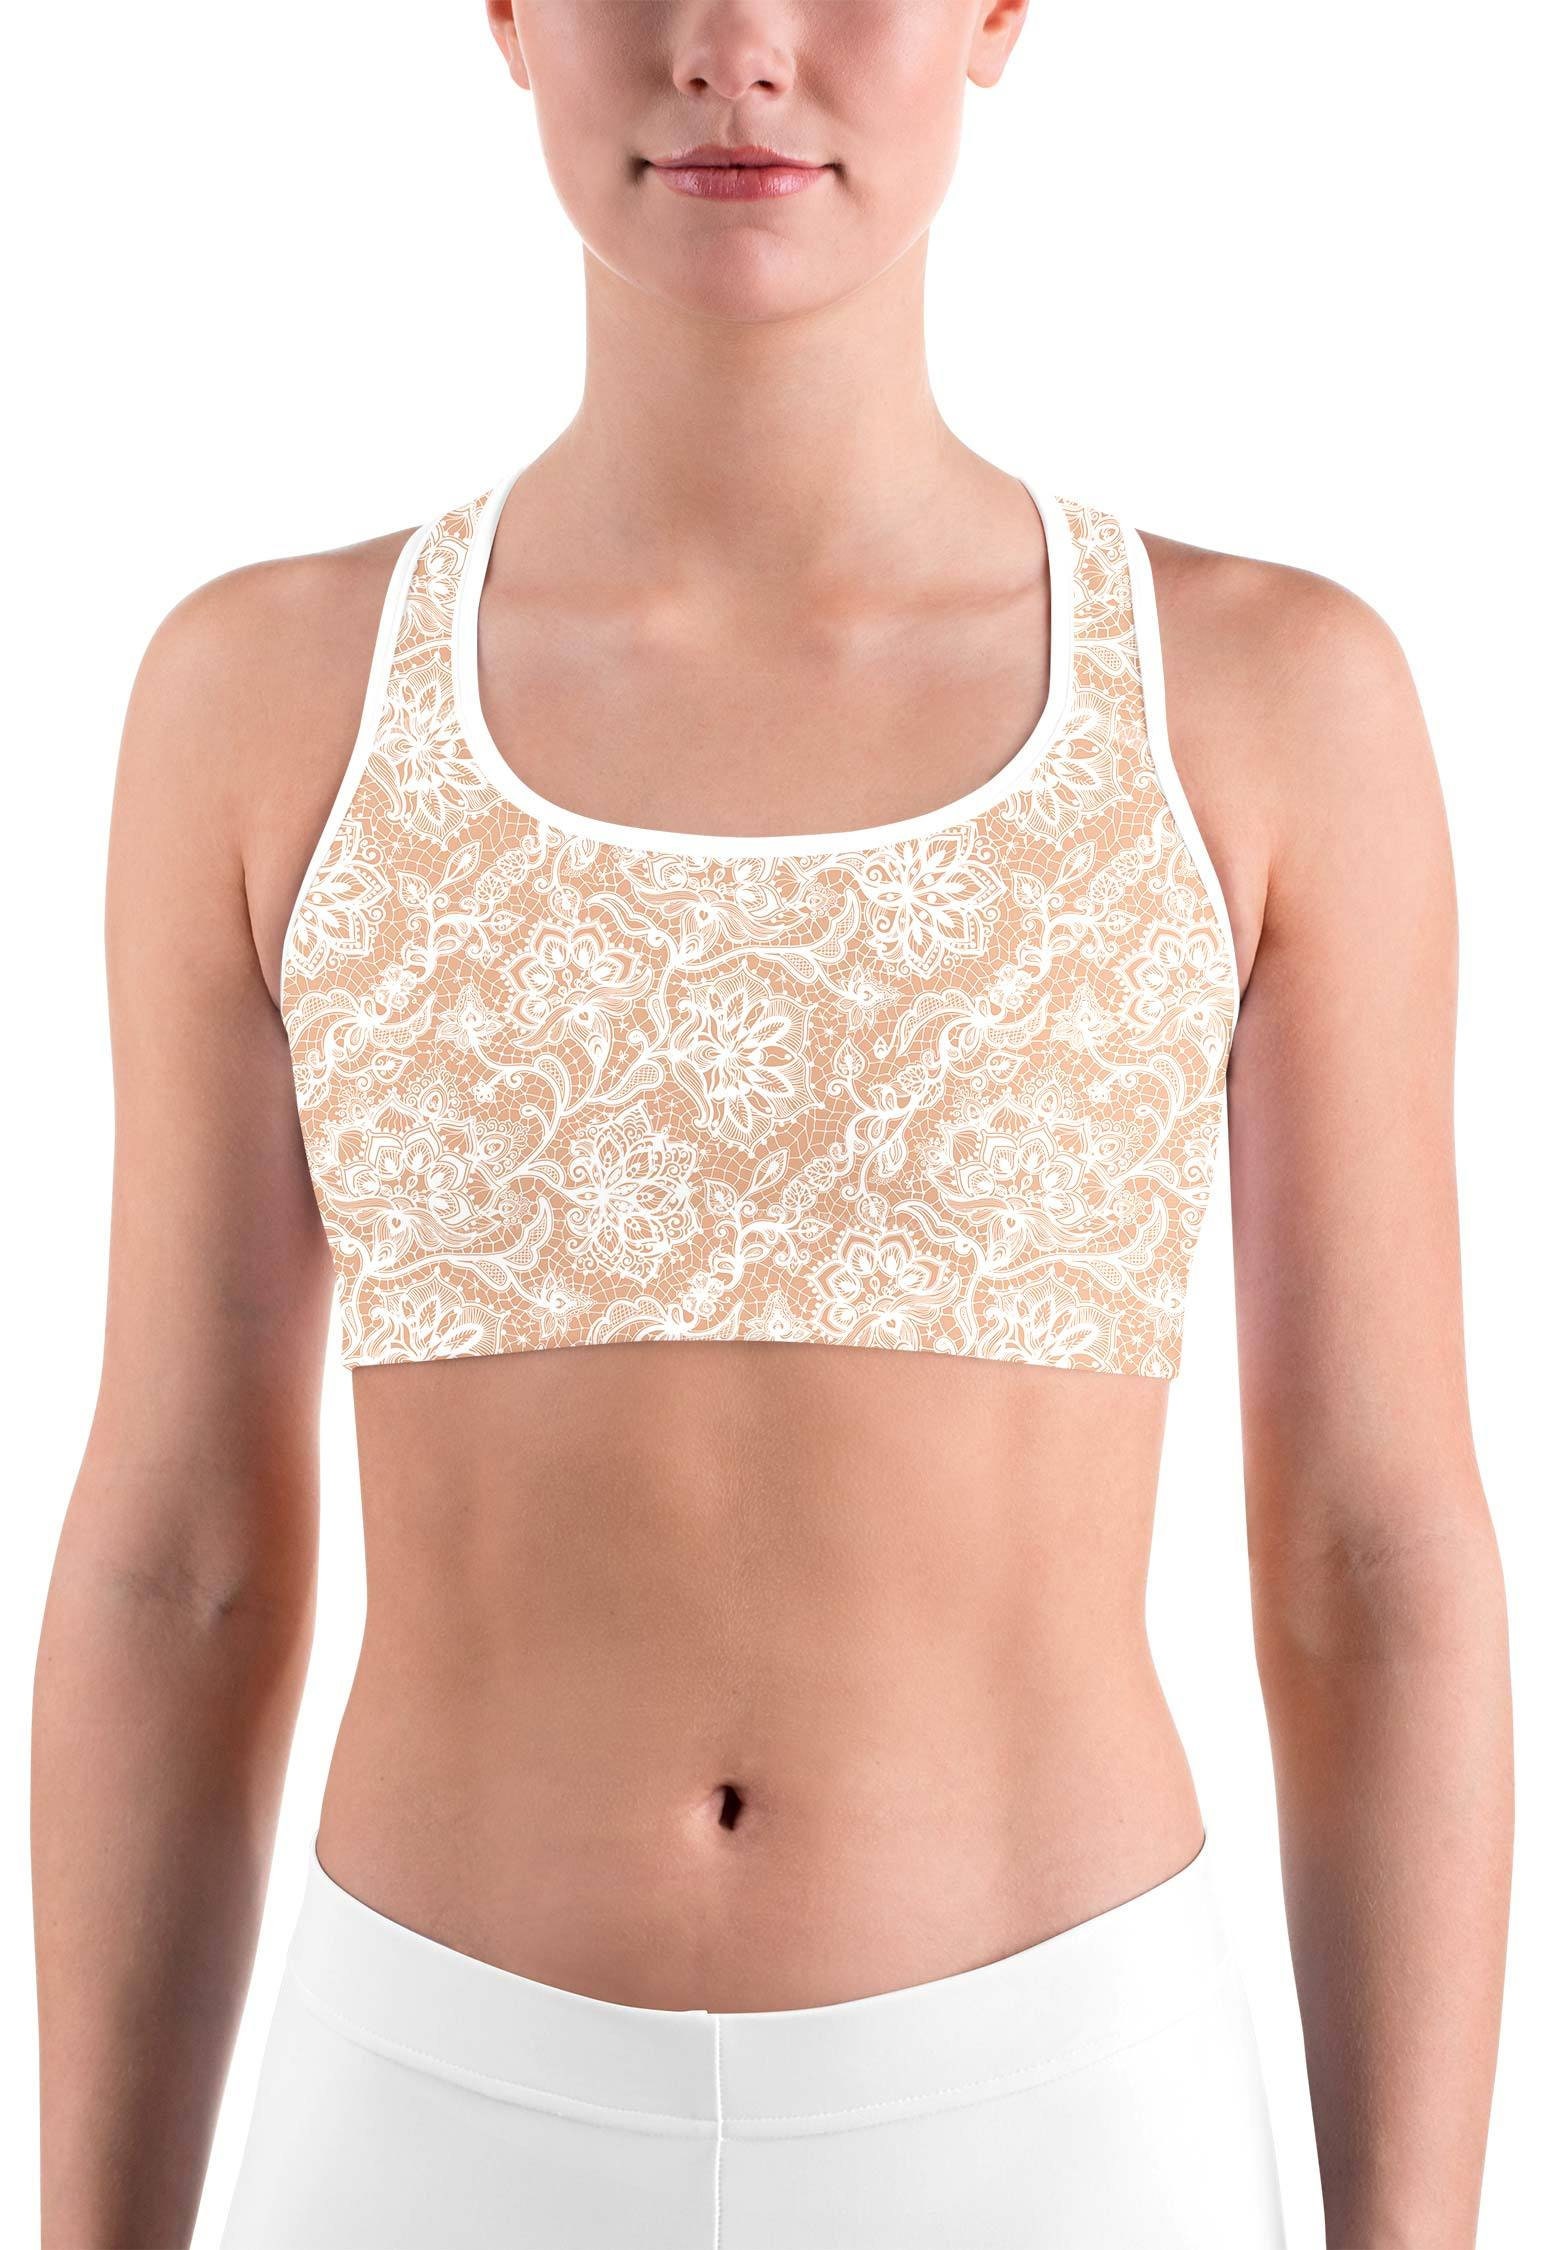 Women's Full Coverage Front Closure Wire Back Support Posture Bra 2PC  (Beige And White) Woman's Sports Bra Women Support Bras Women Bras Wireless  Front Closure Medium Sports Bra No Wire Bra Women 